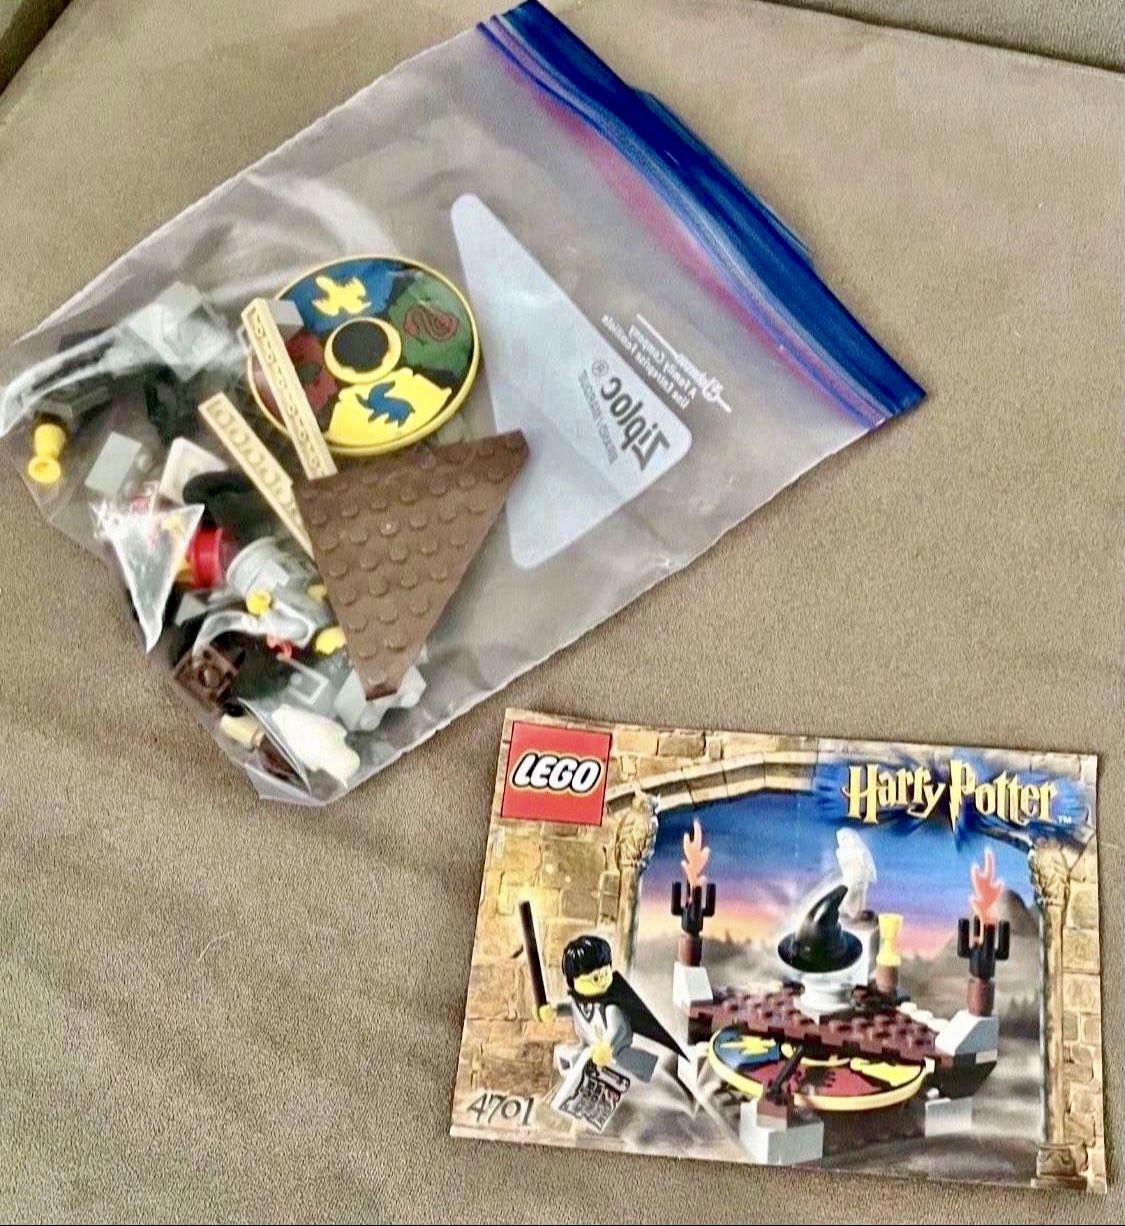 Collectable Harry Potter LEGO 4701 “Sorting Hat.” 